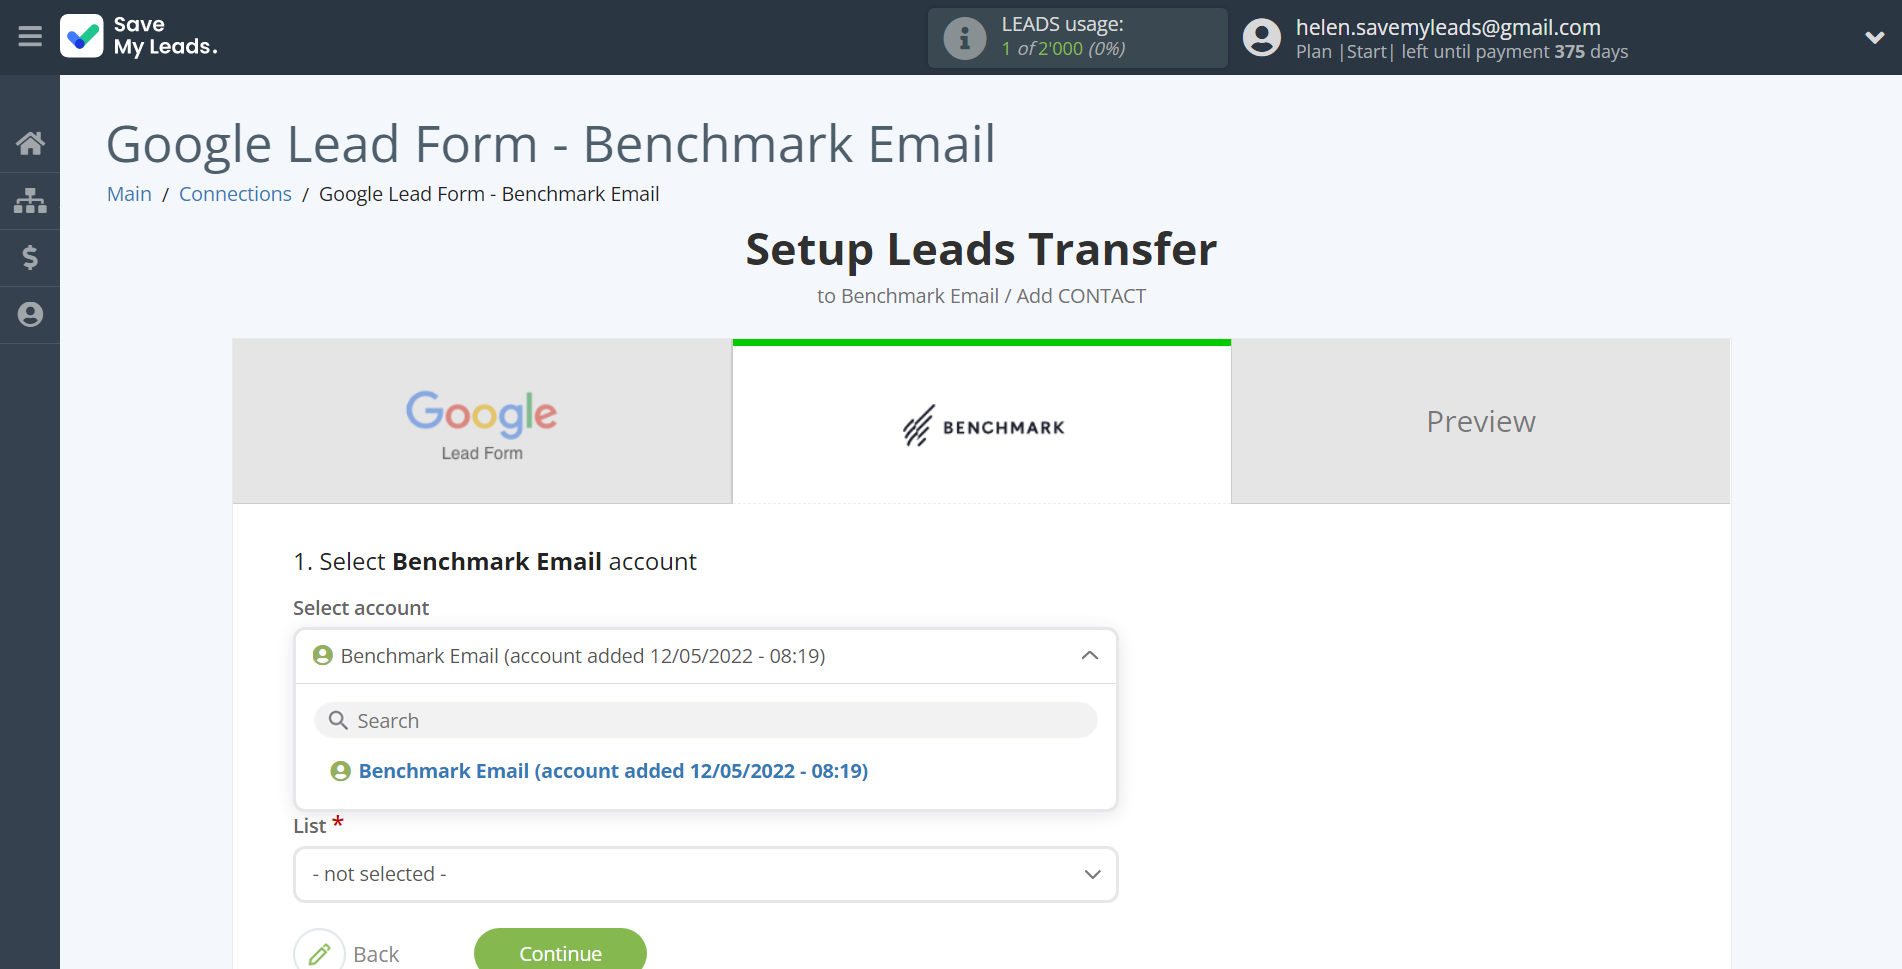 How to Connect Google Lead Form with Benchmark Email | Data Destination account selection